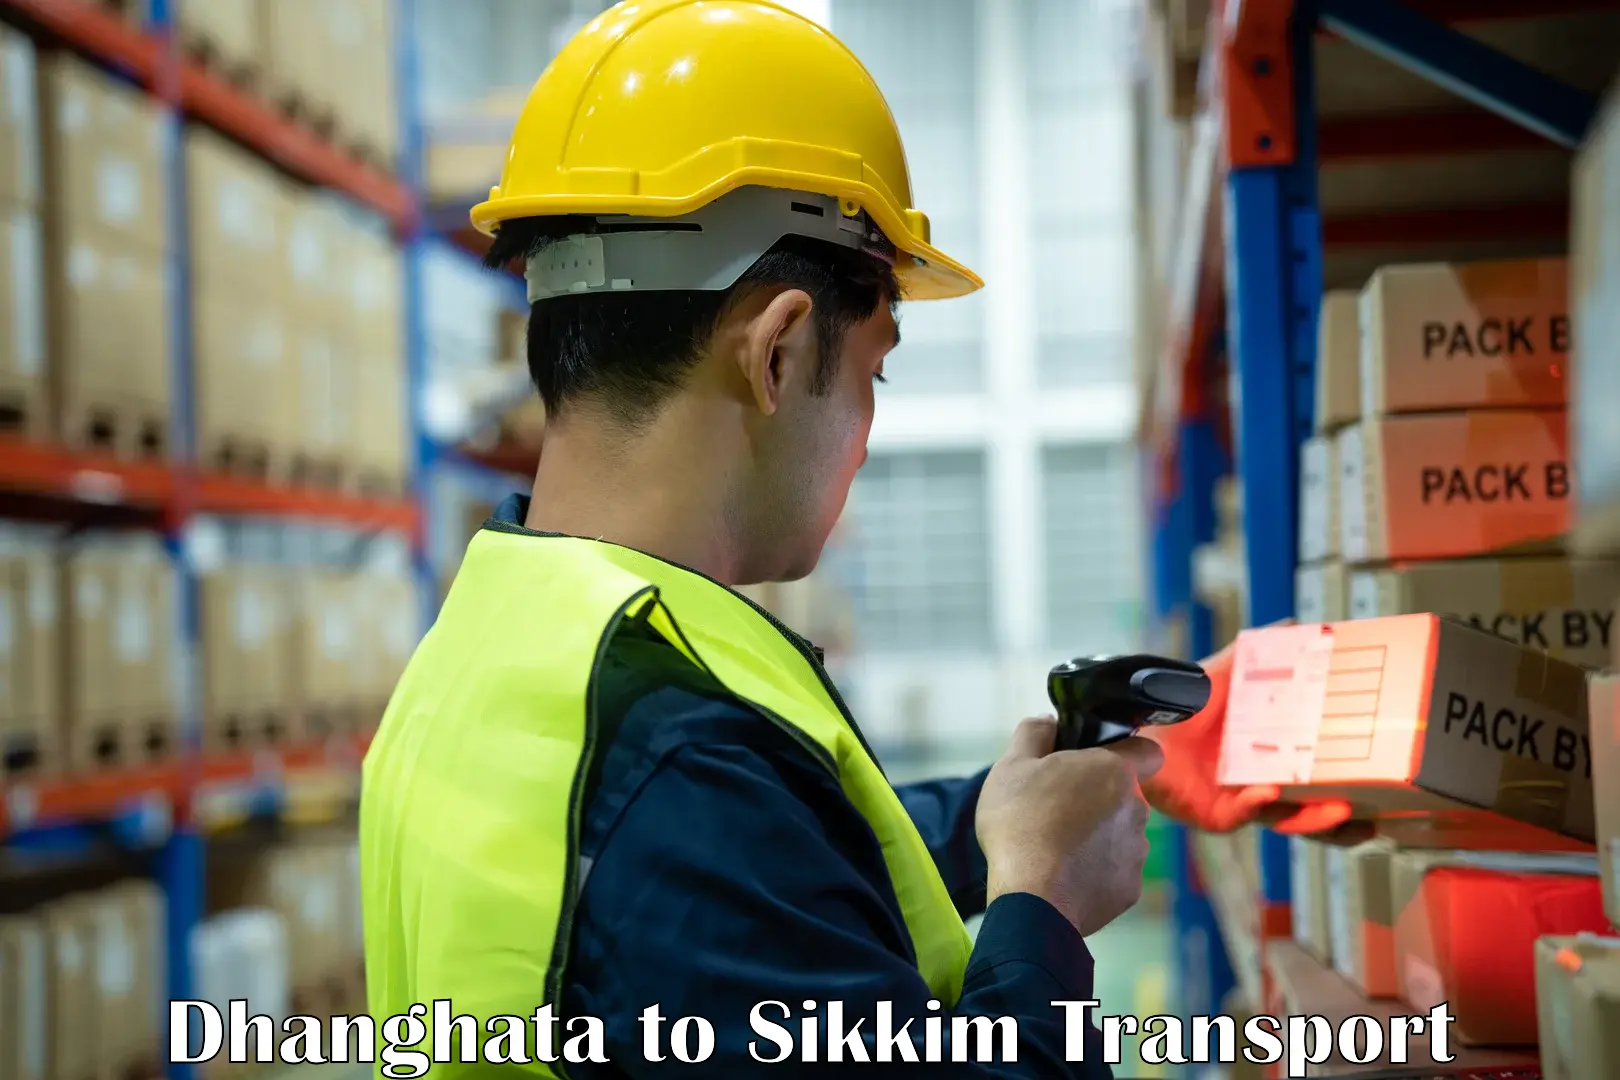 Commercial transport service Dhanghata to East Sikkim